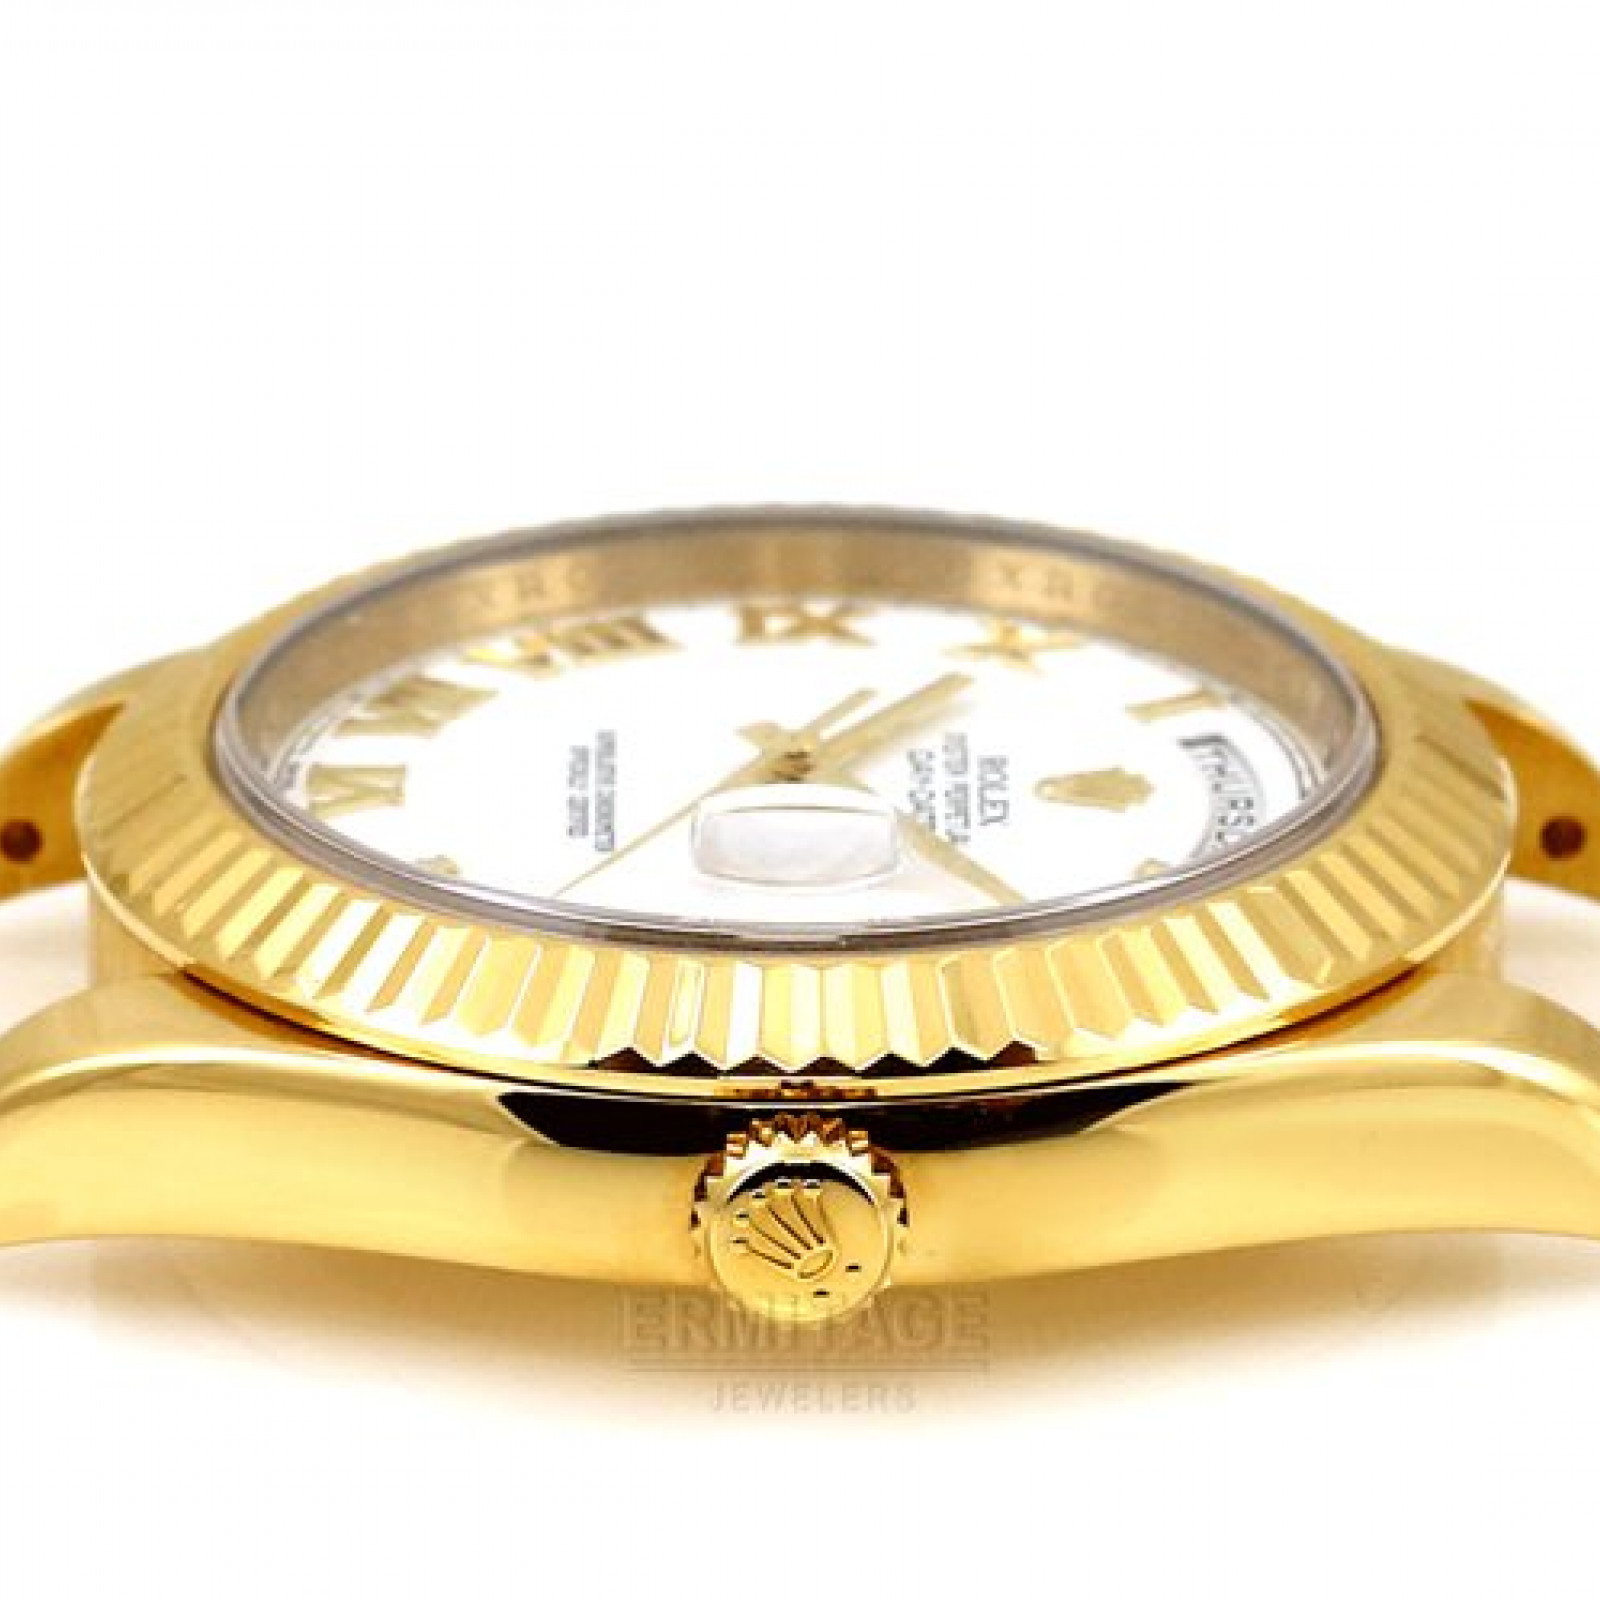 Pre-Owned Rolex Day-Date II 218238